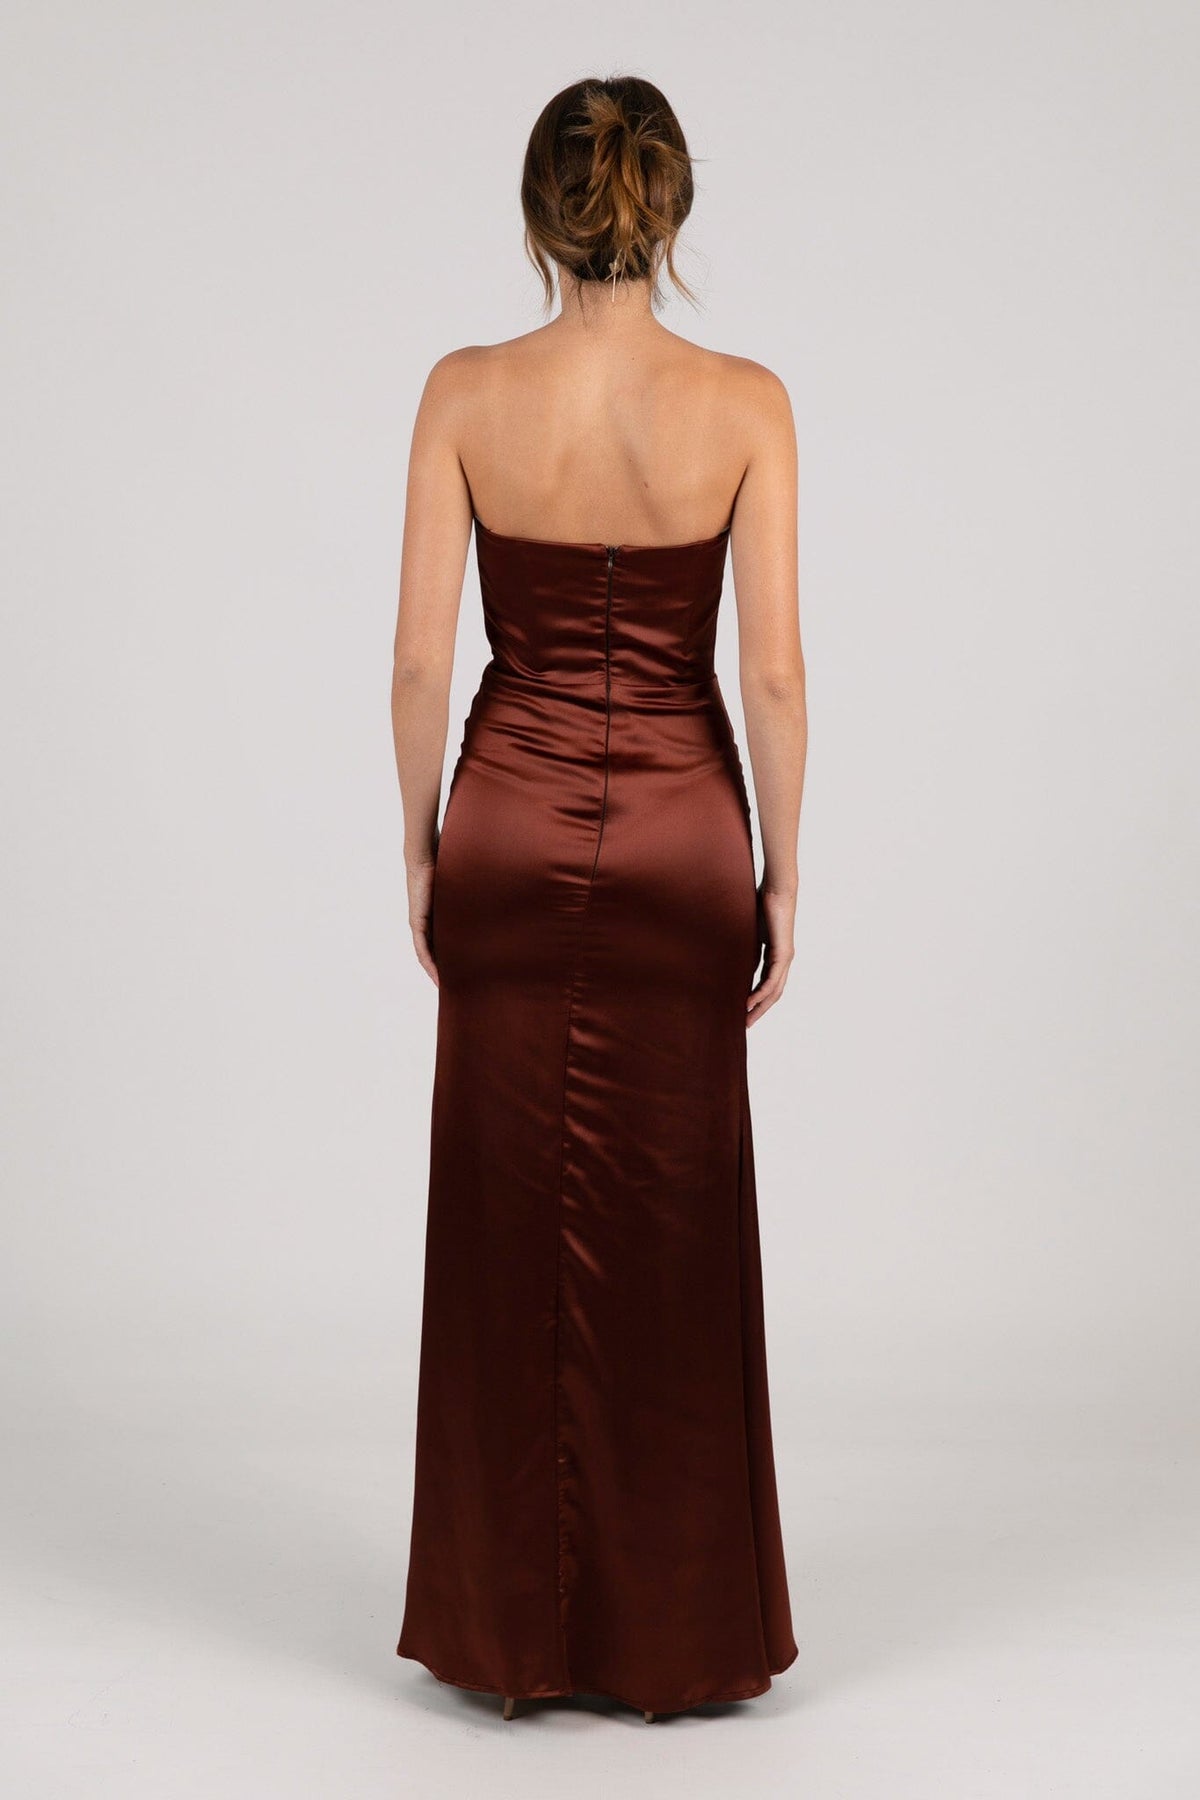 Back Image of Mahogany Dark Brown Red Strapless Satin Maxi Dress with Draped Bust Detail and Side Slit